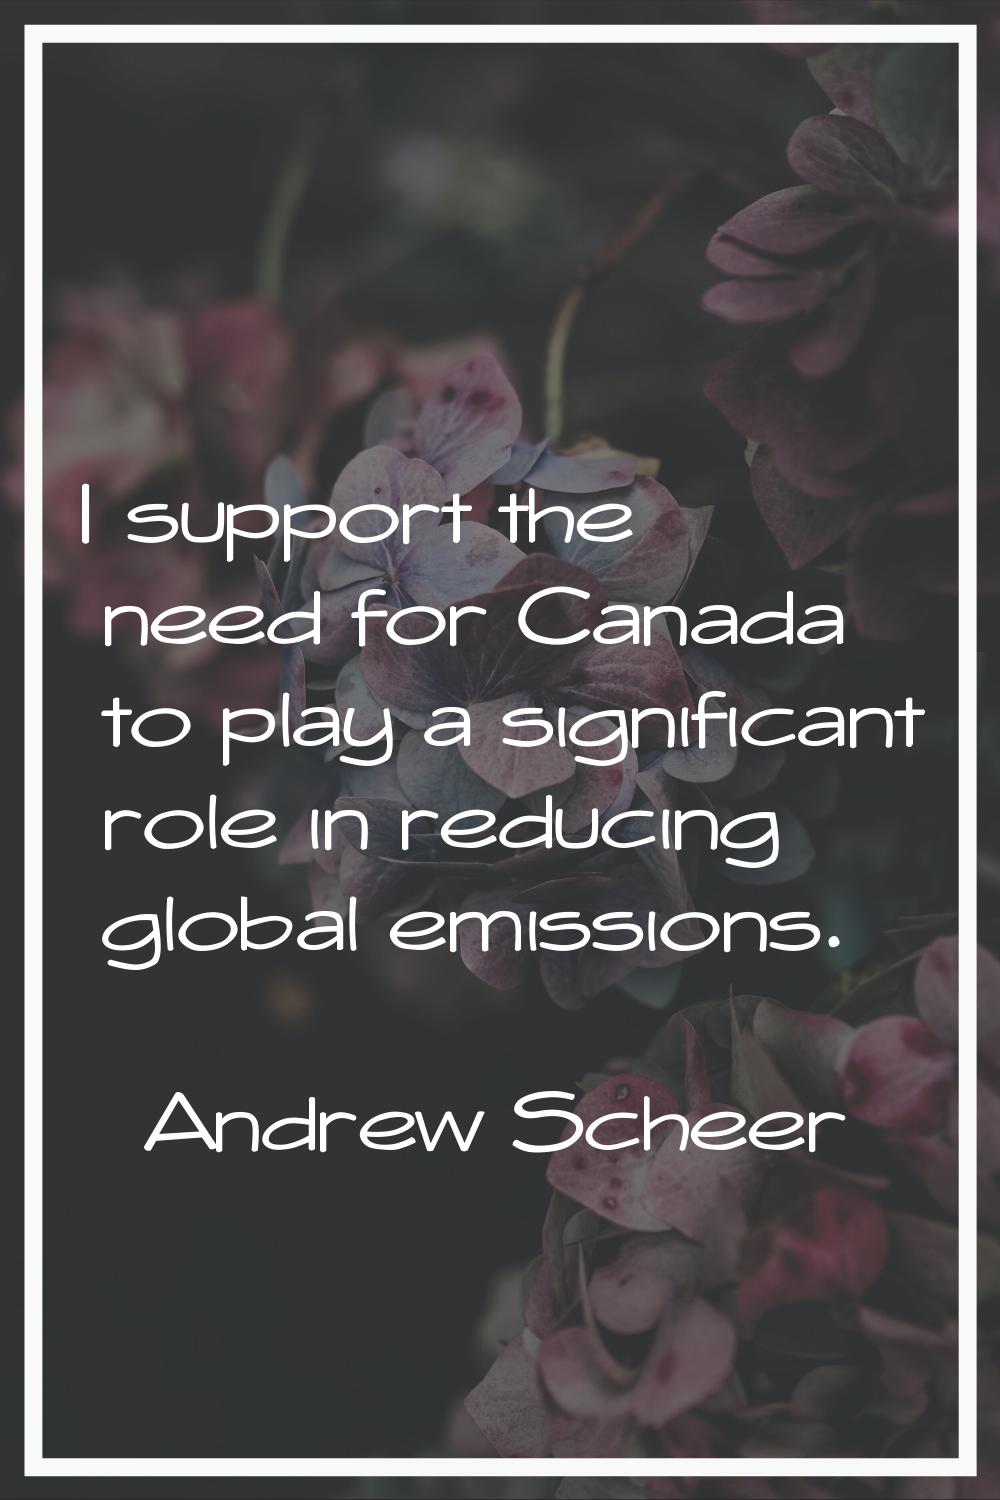 I support the need for Canada to play a significant role in reducing global emissions.